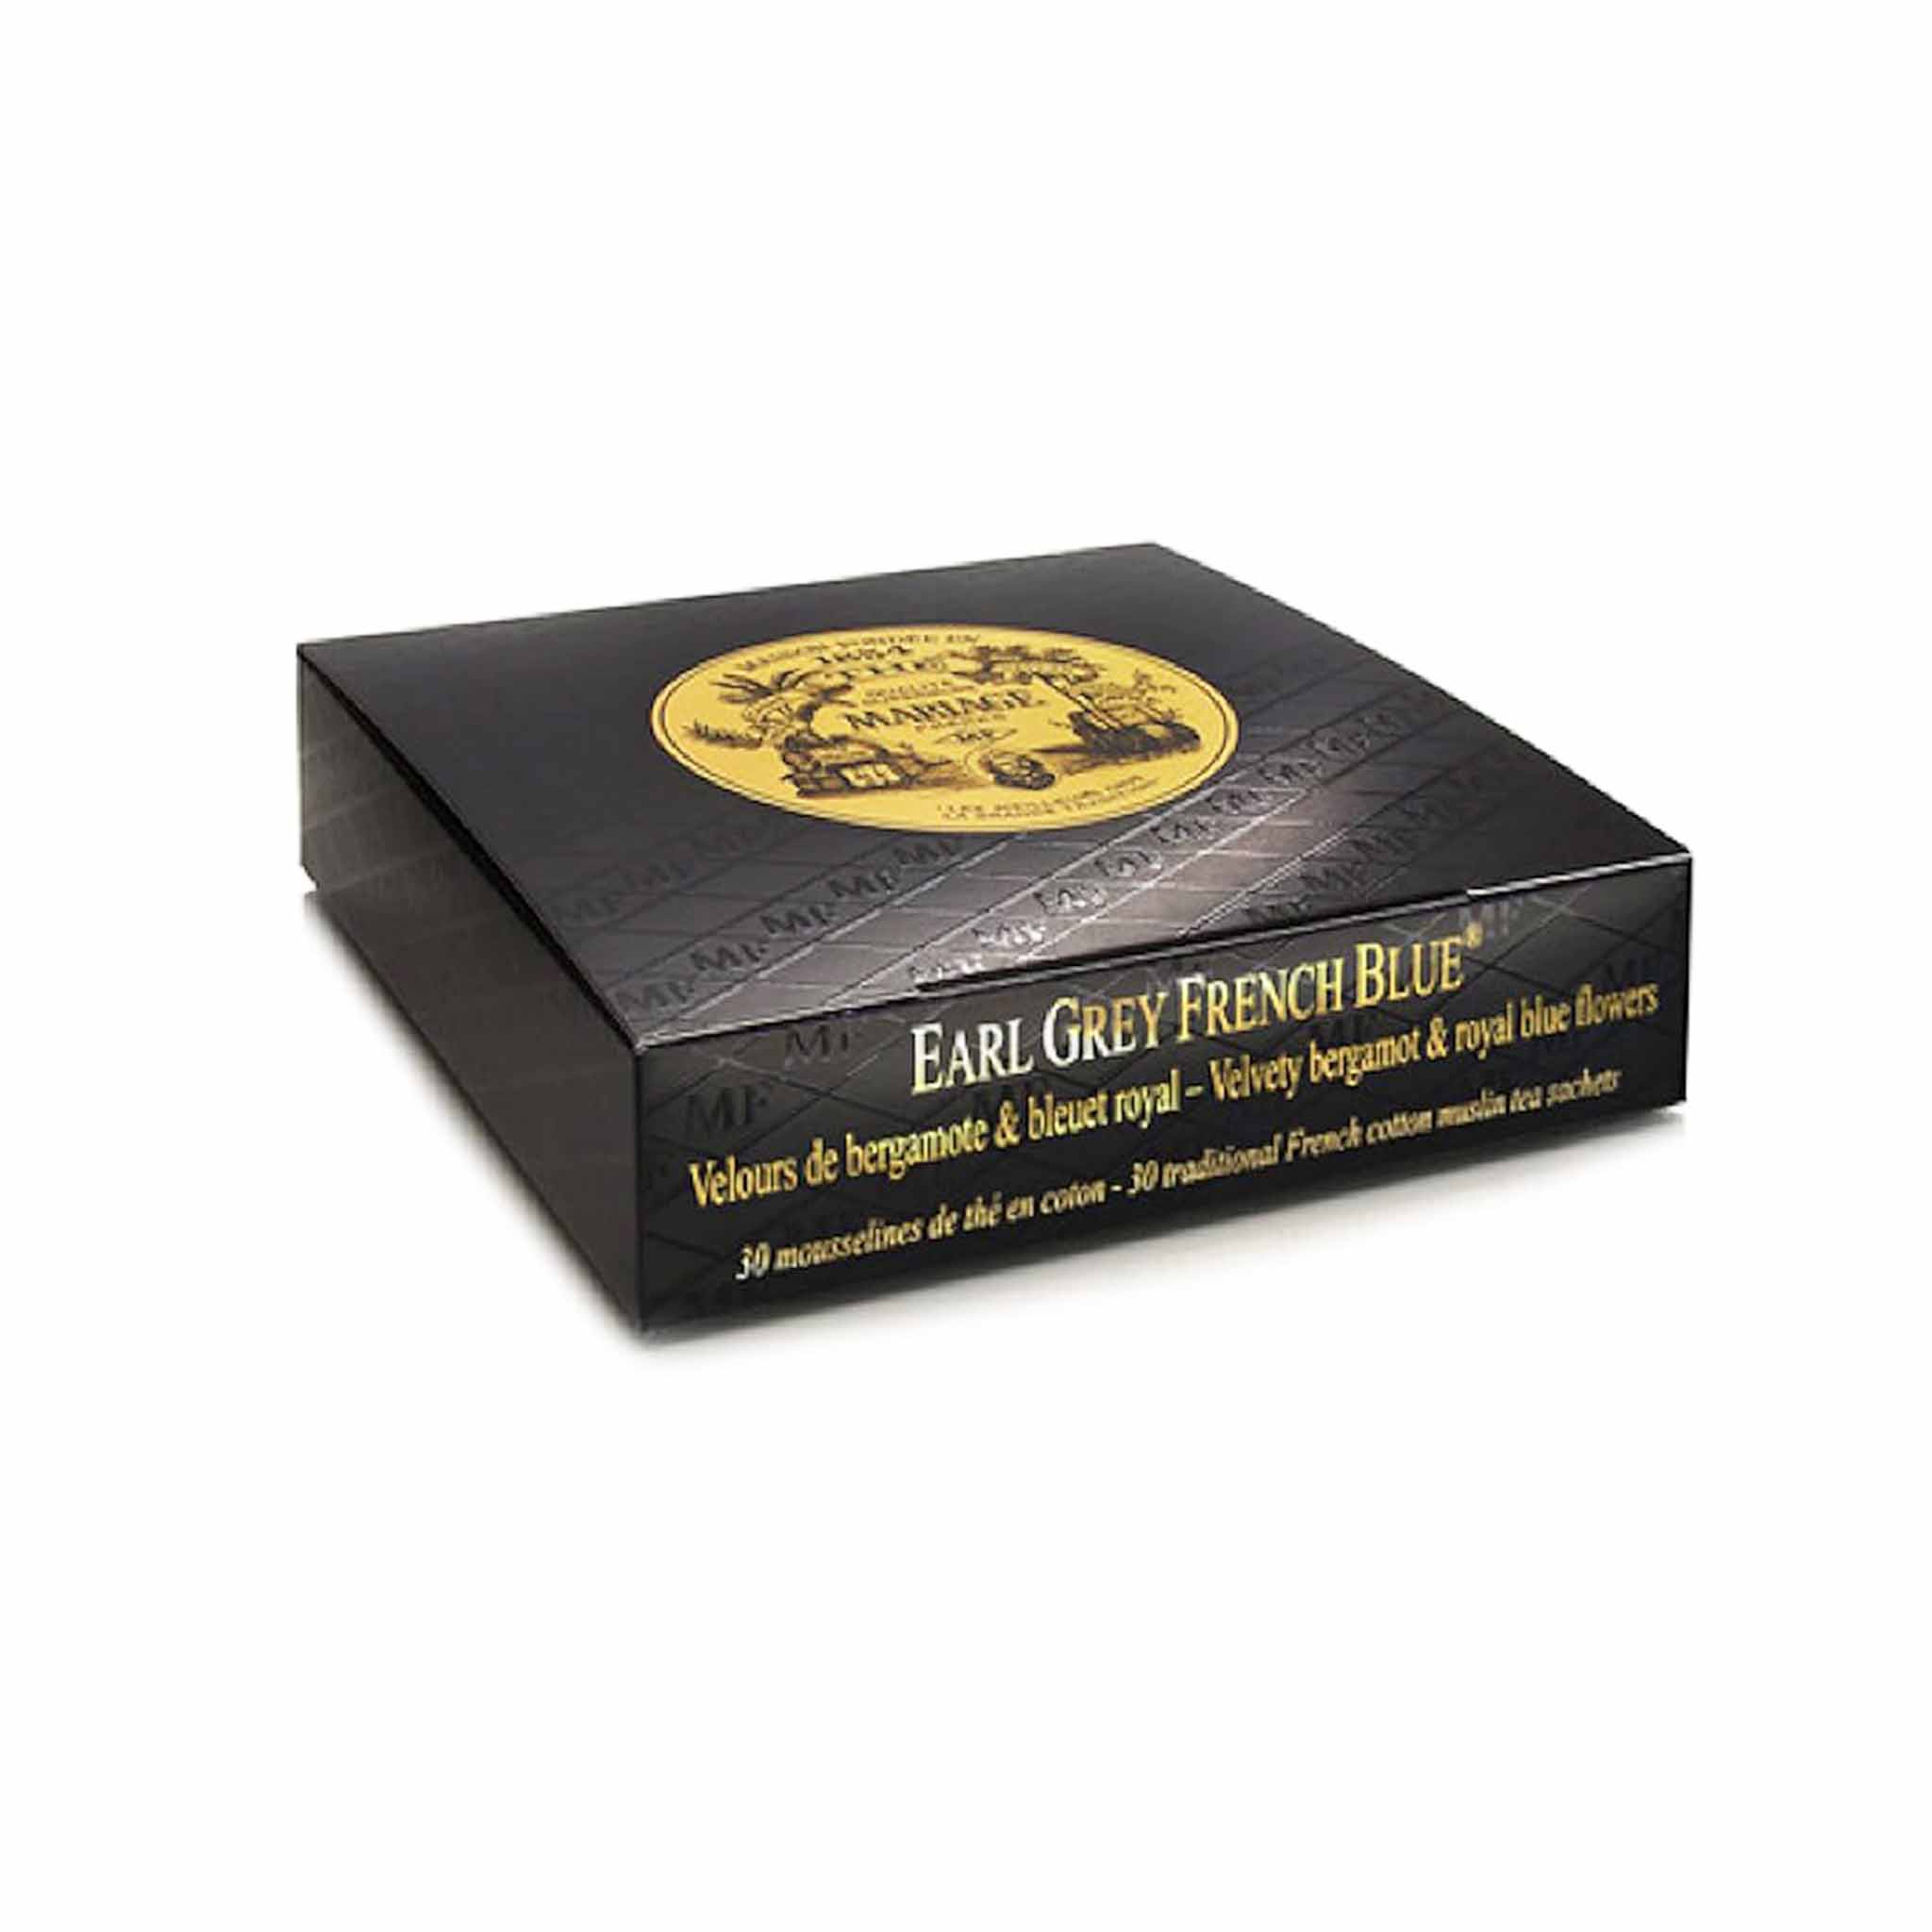 MARIAGE FRERES EARLY GREY FRENCH BLUE TEA 75g